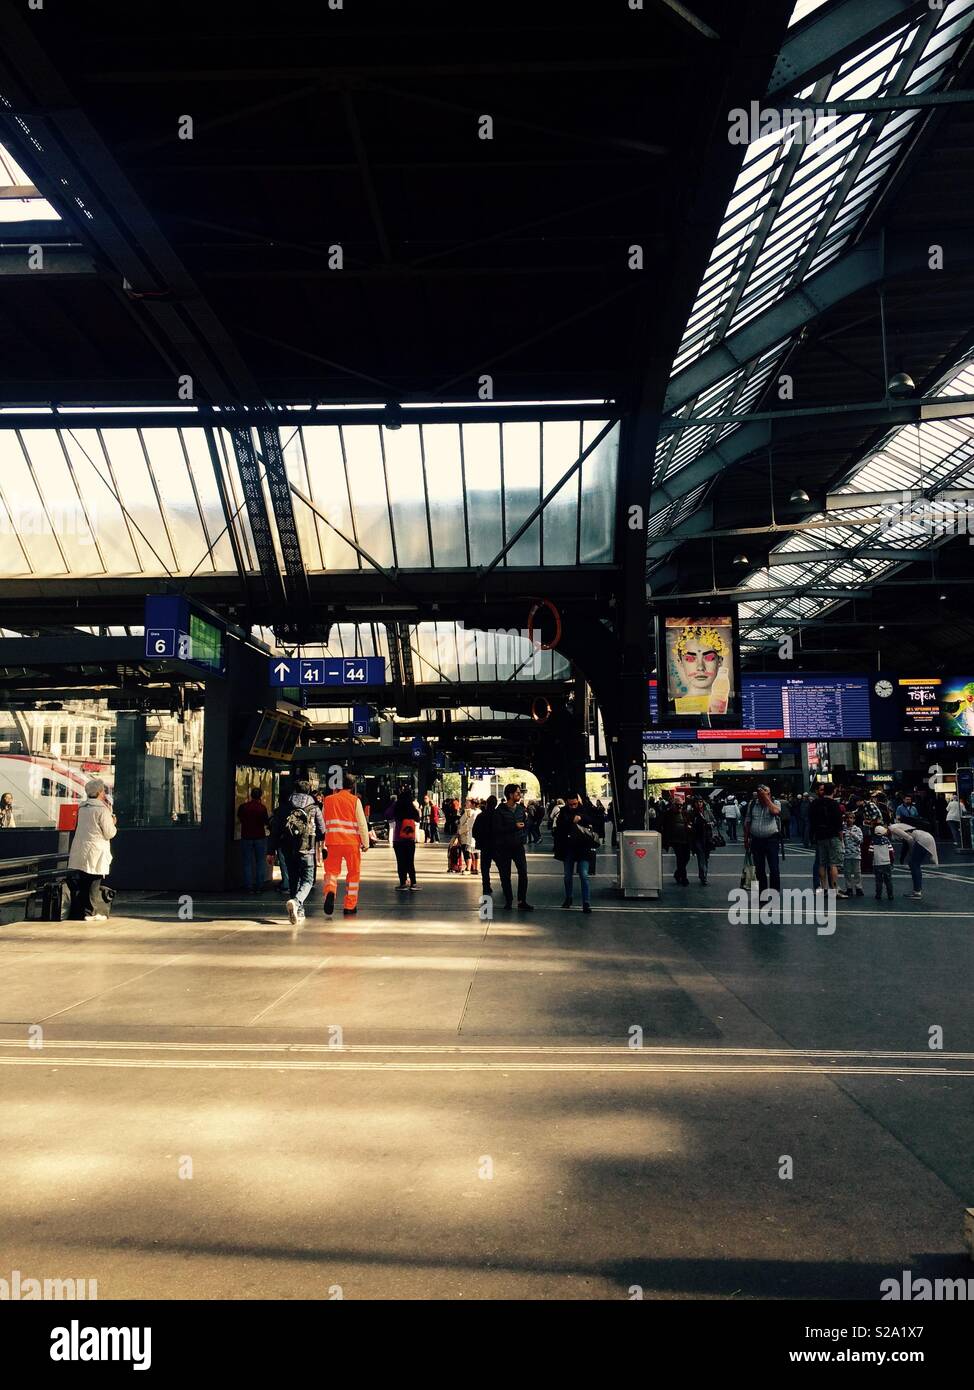 Zurich Hauptbahnhof or main train station in Switzerland during the busy daytime hours and rushing of commuters between trains Stock Photo